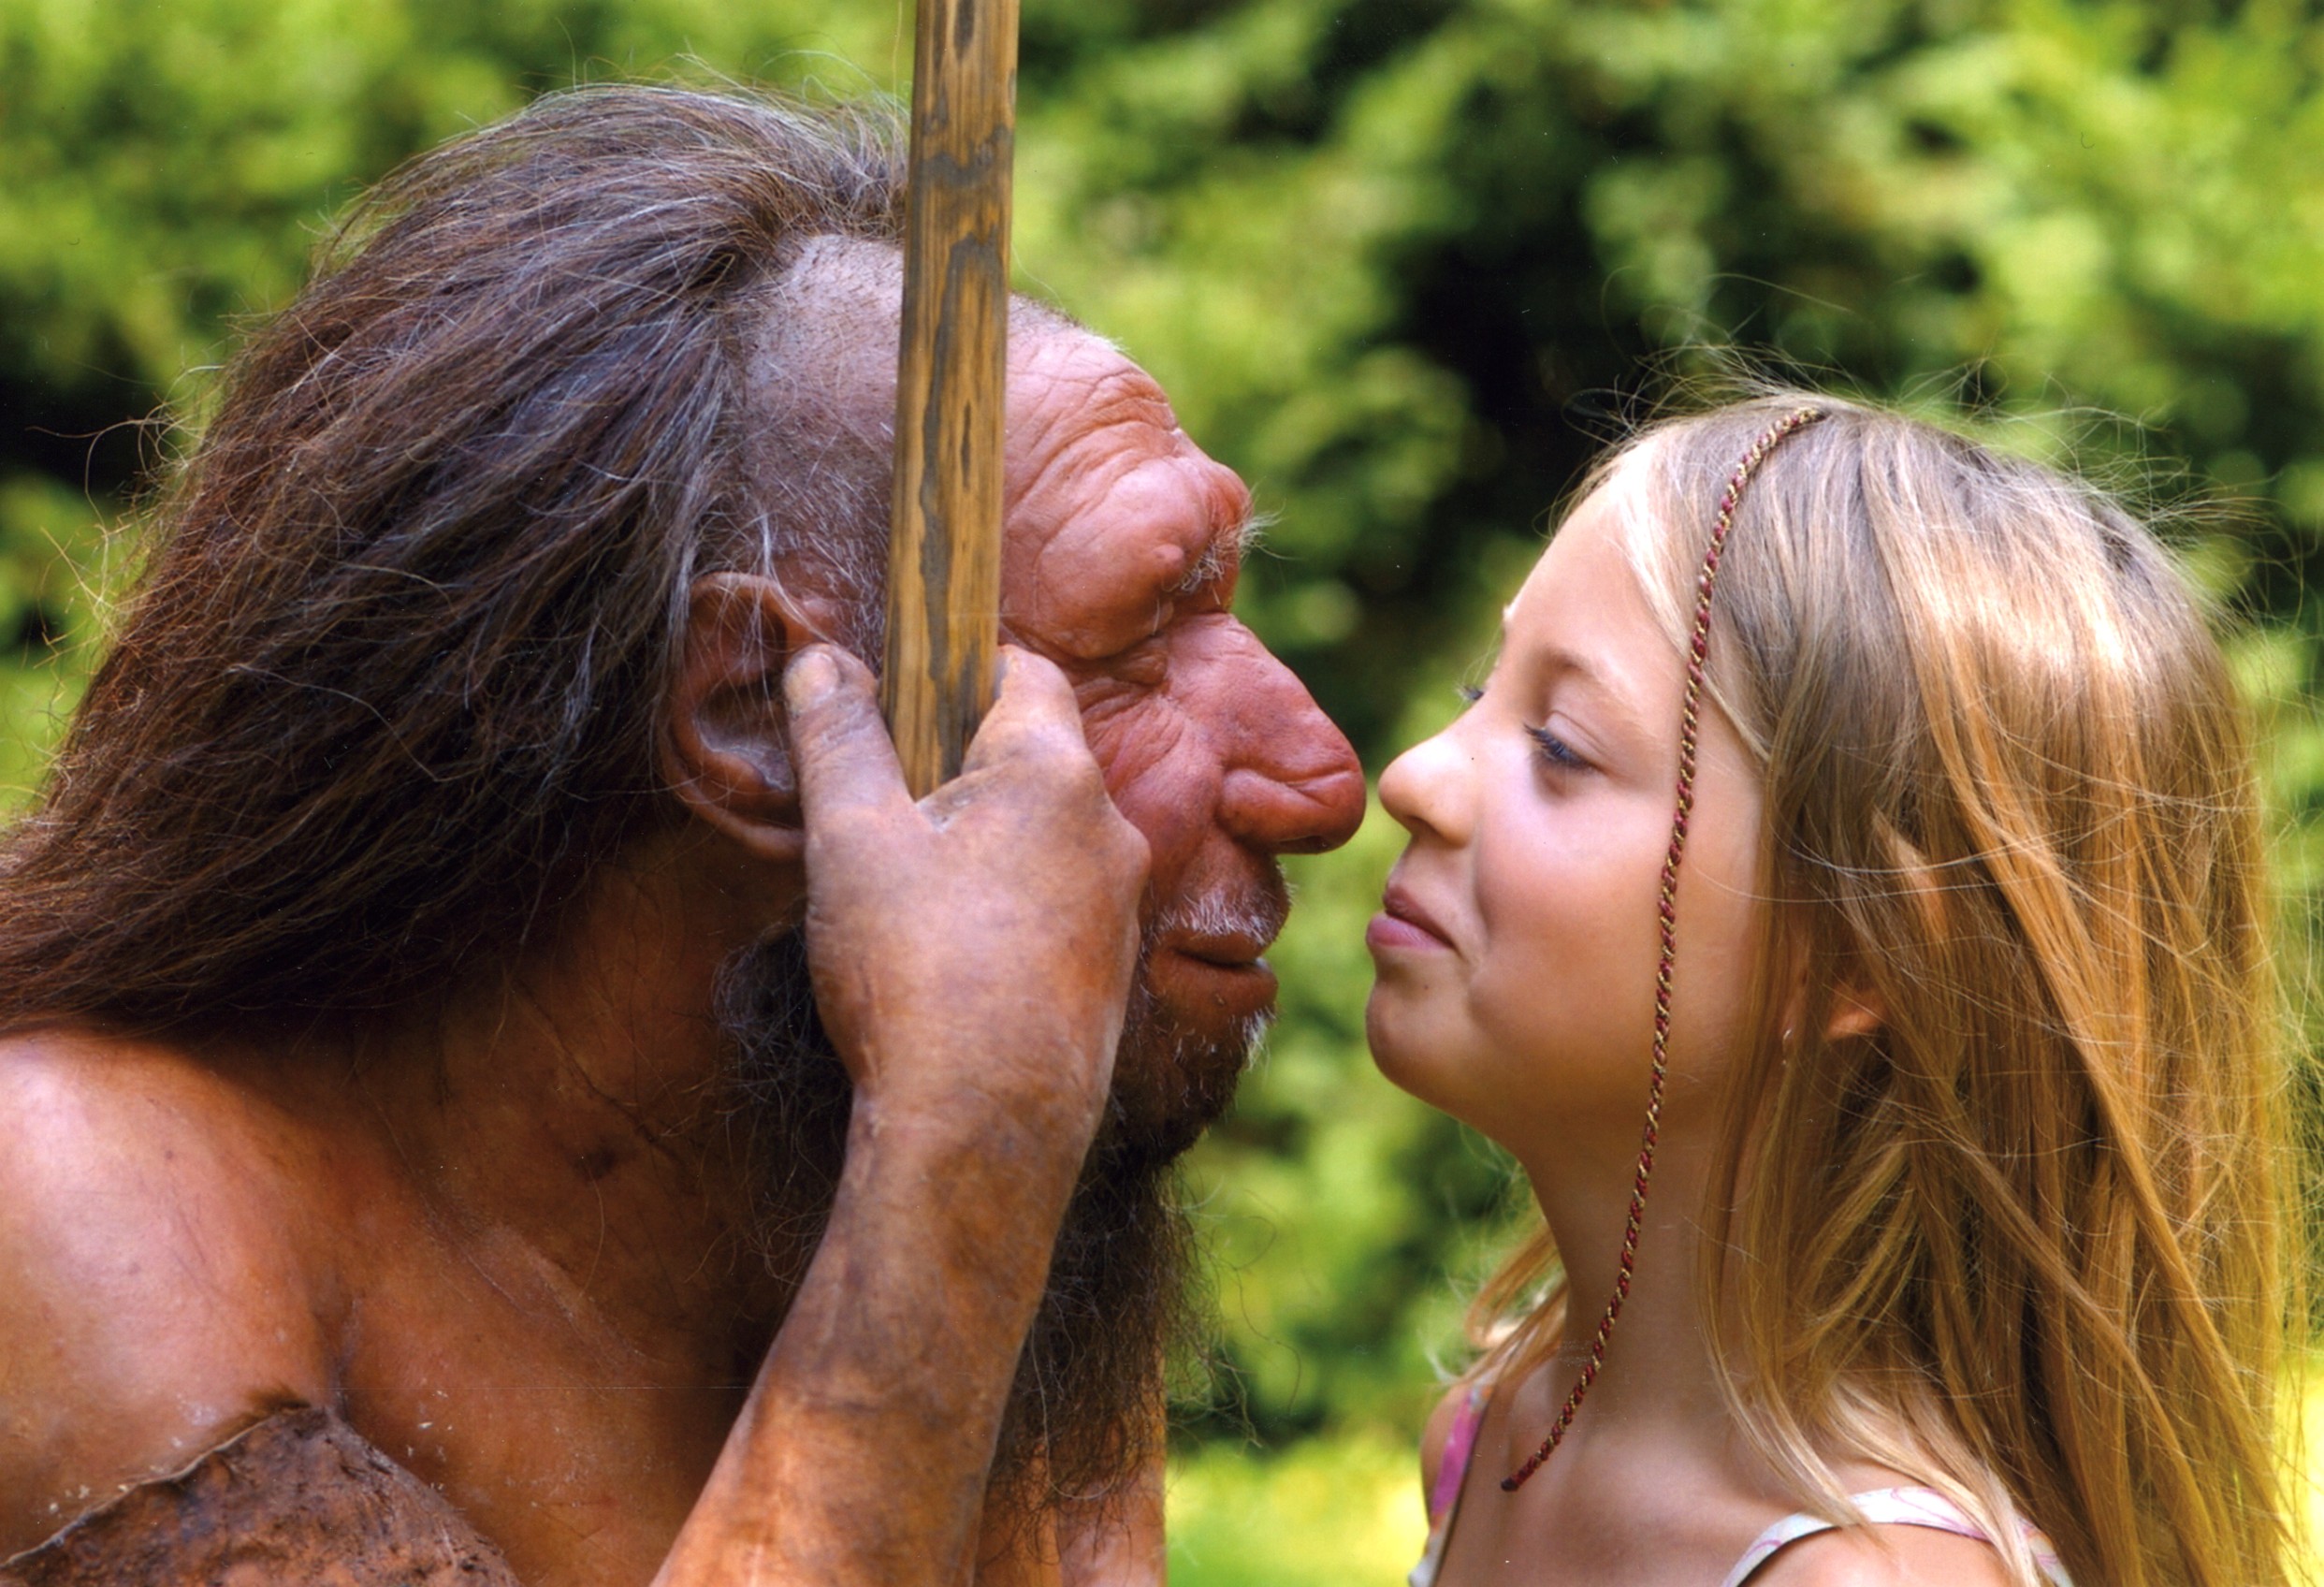 New Study Suggests Neanderthals Died Out Earlier Did Not Coexist With Modern Humans